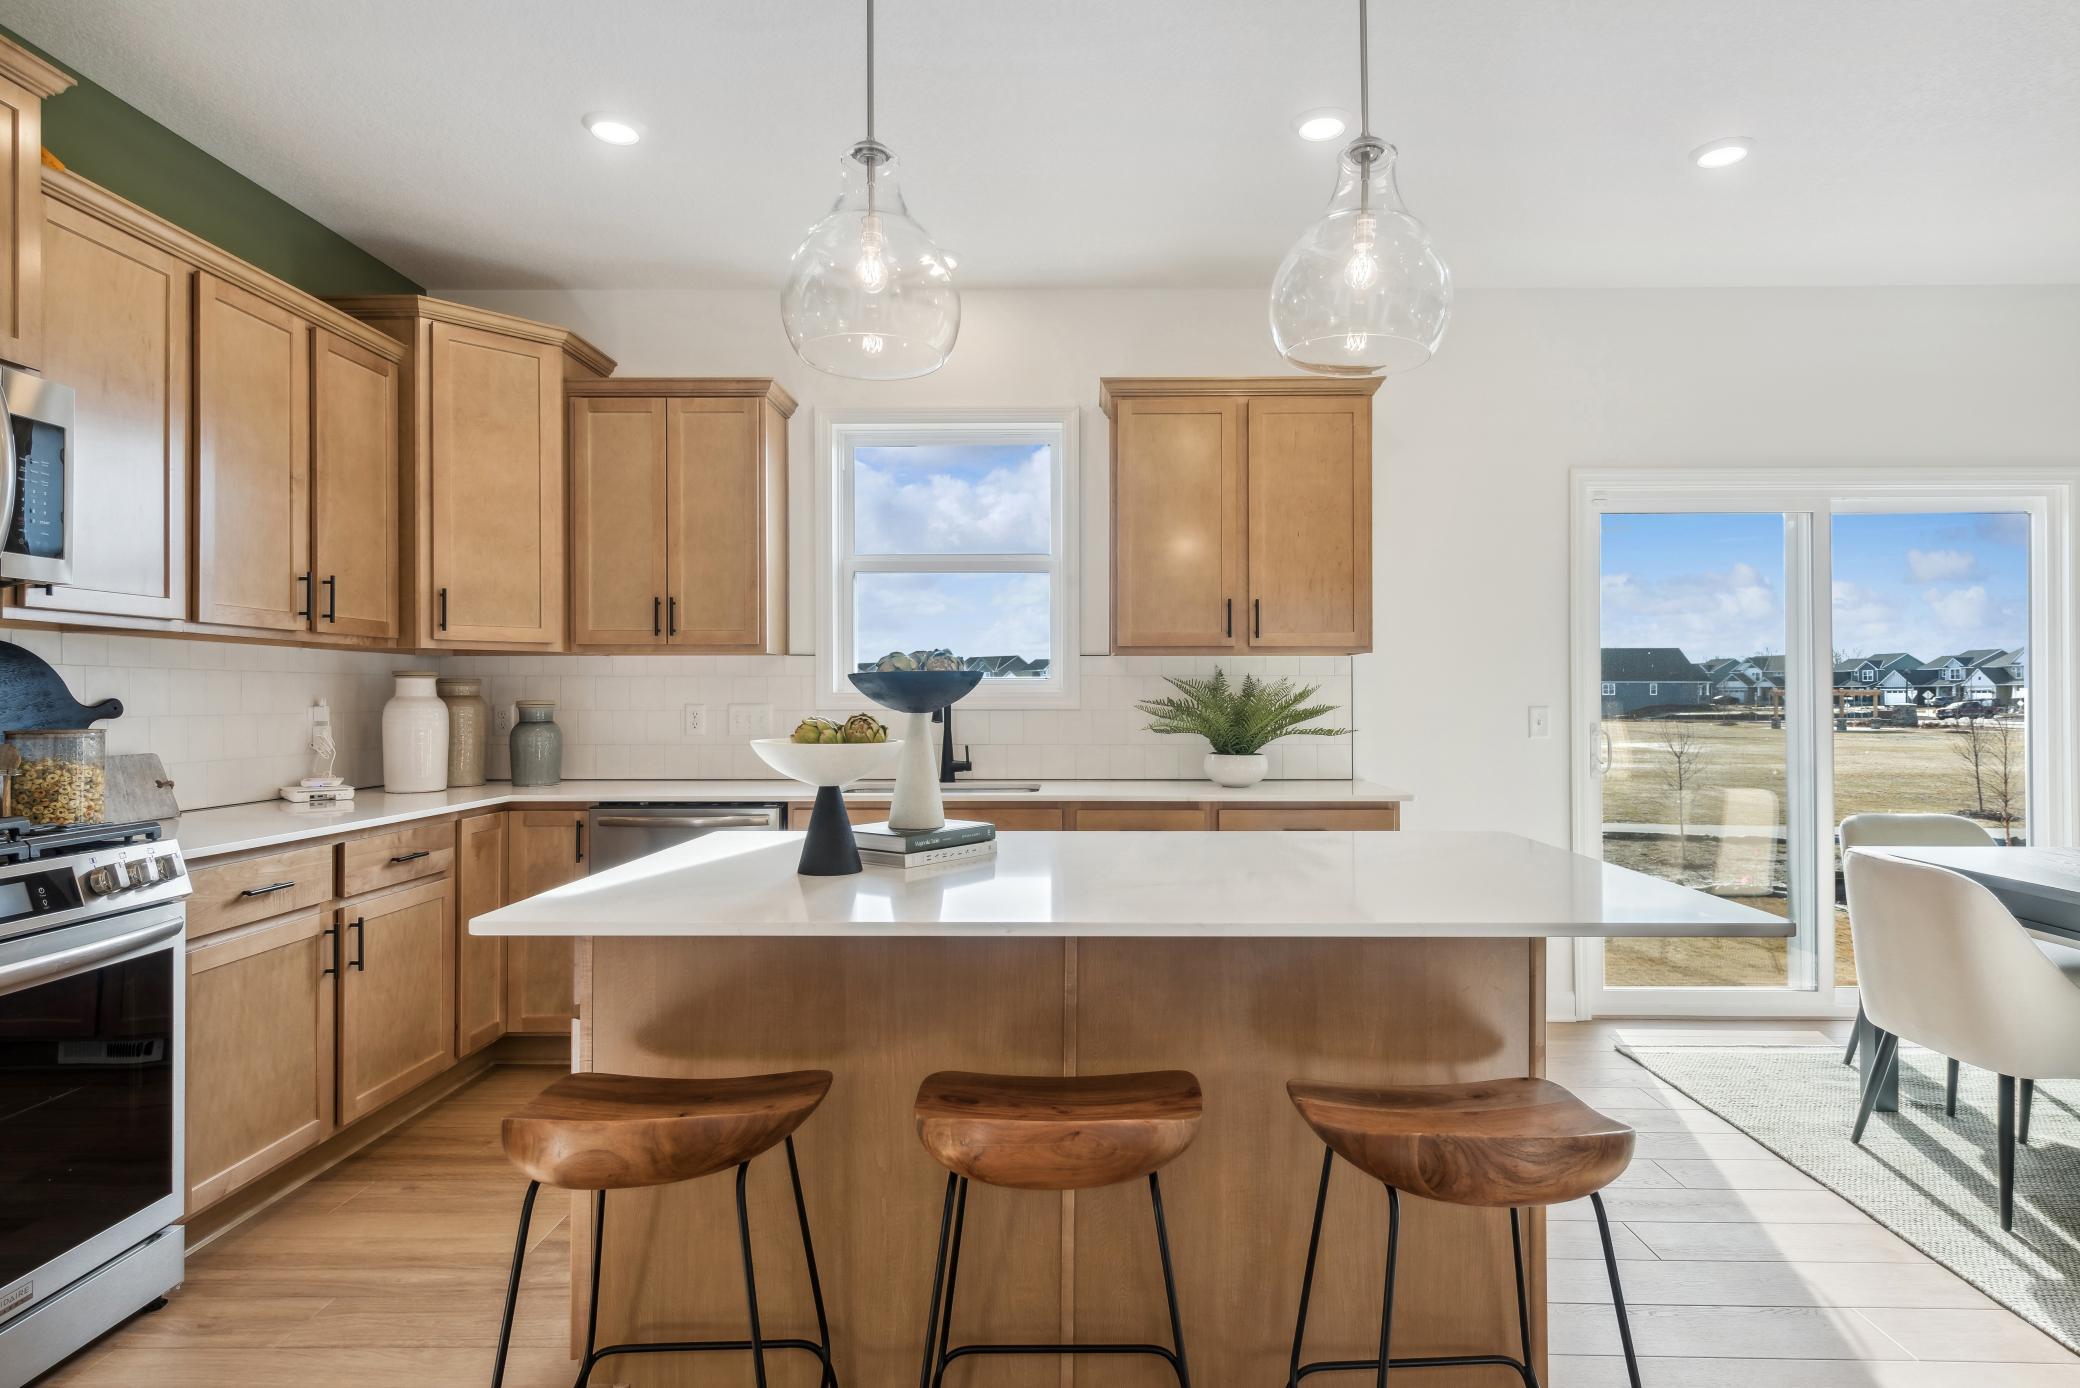 (Photo of model home, actual features may vary) The kitchen island can be turned into an informal dining area, with plenty of space for bar stools or high top chairs